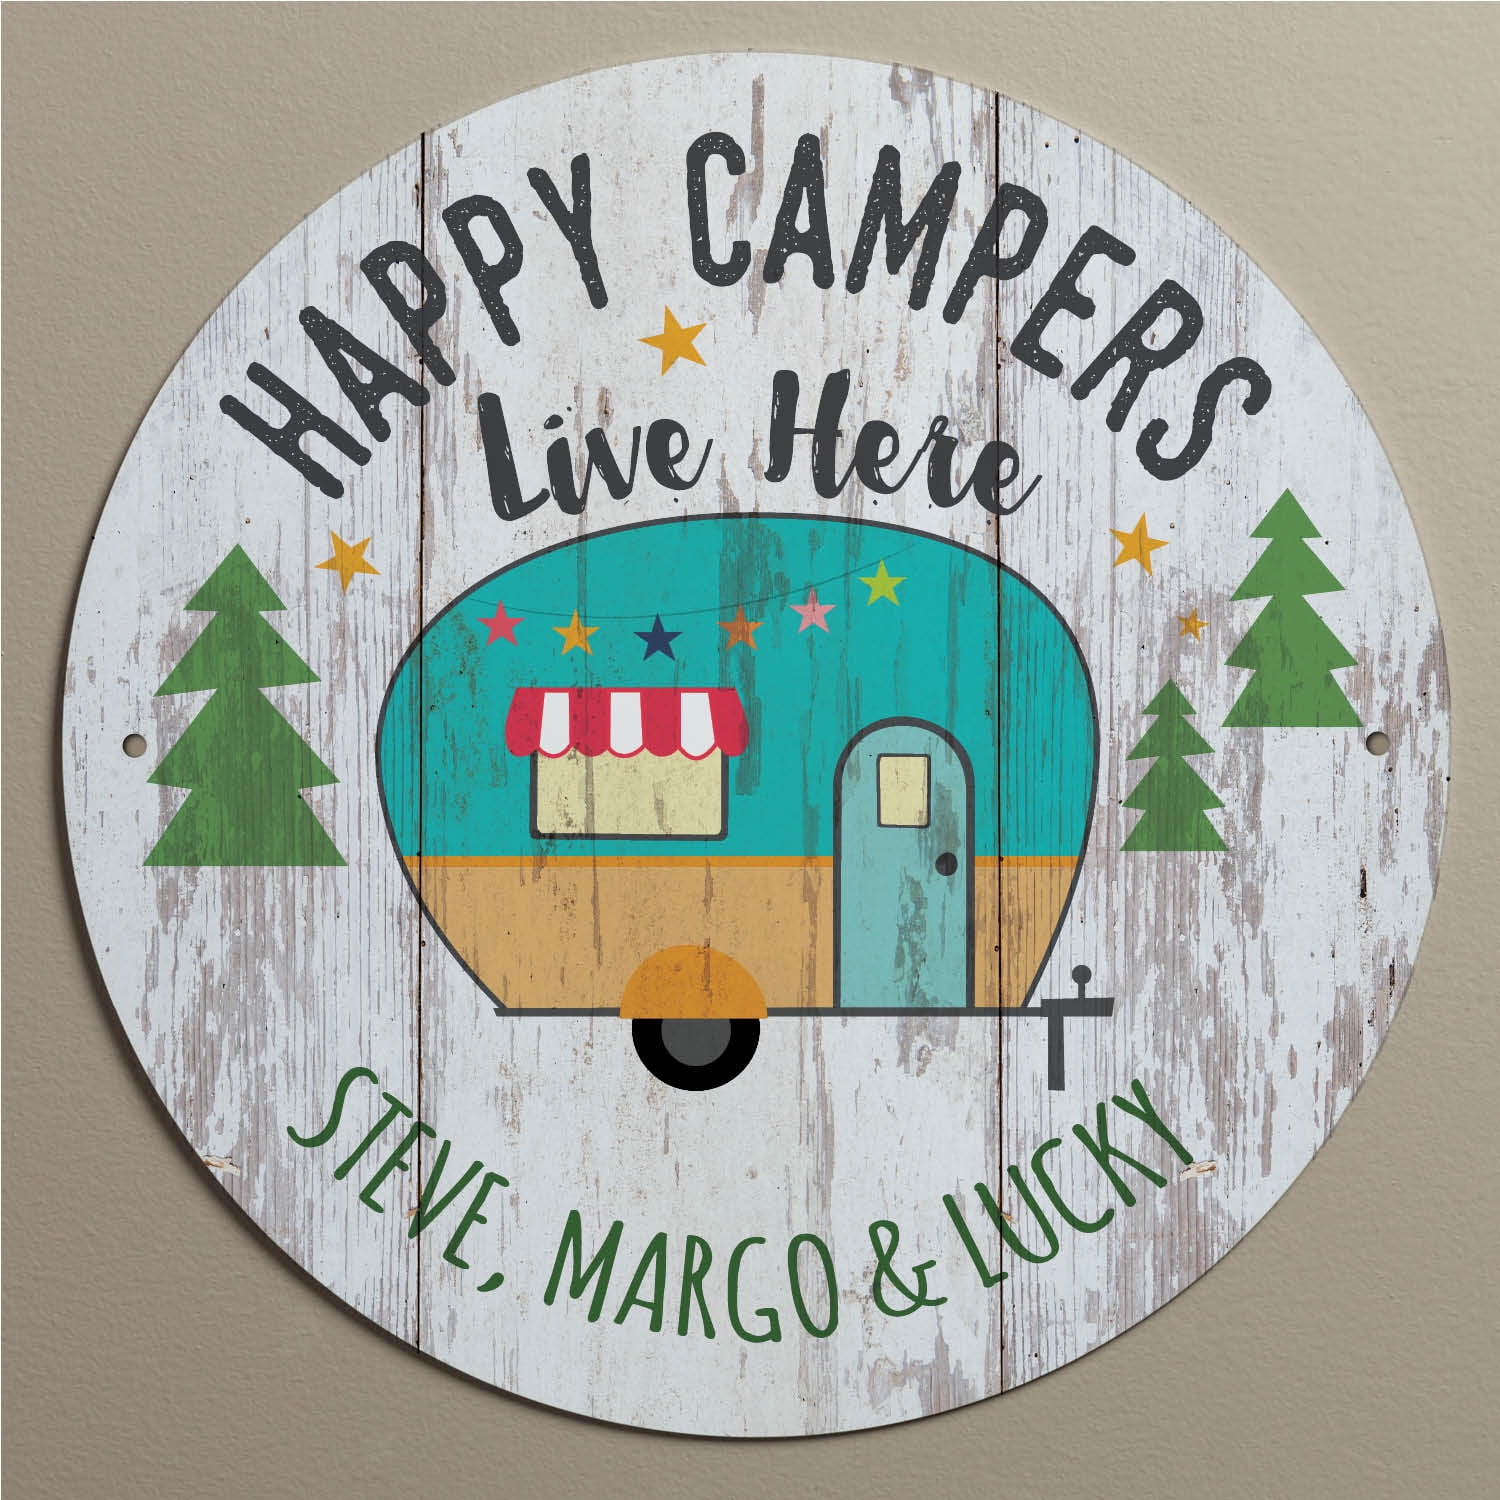 Happy Campers Live Here Personalized Tin Sign - Walmart.com